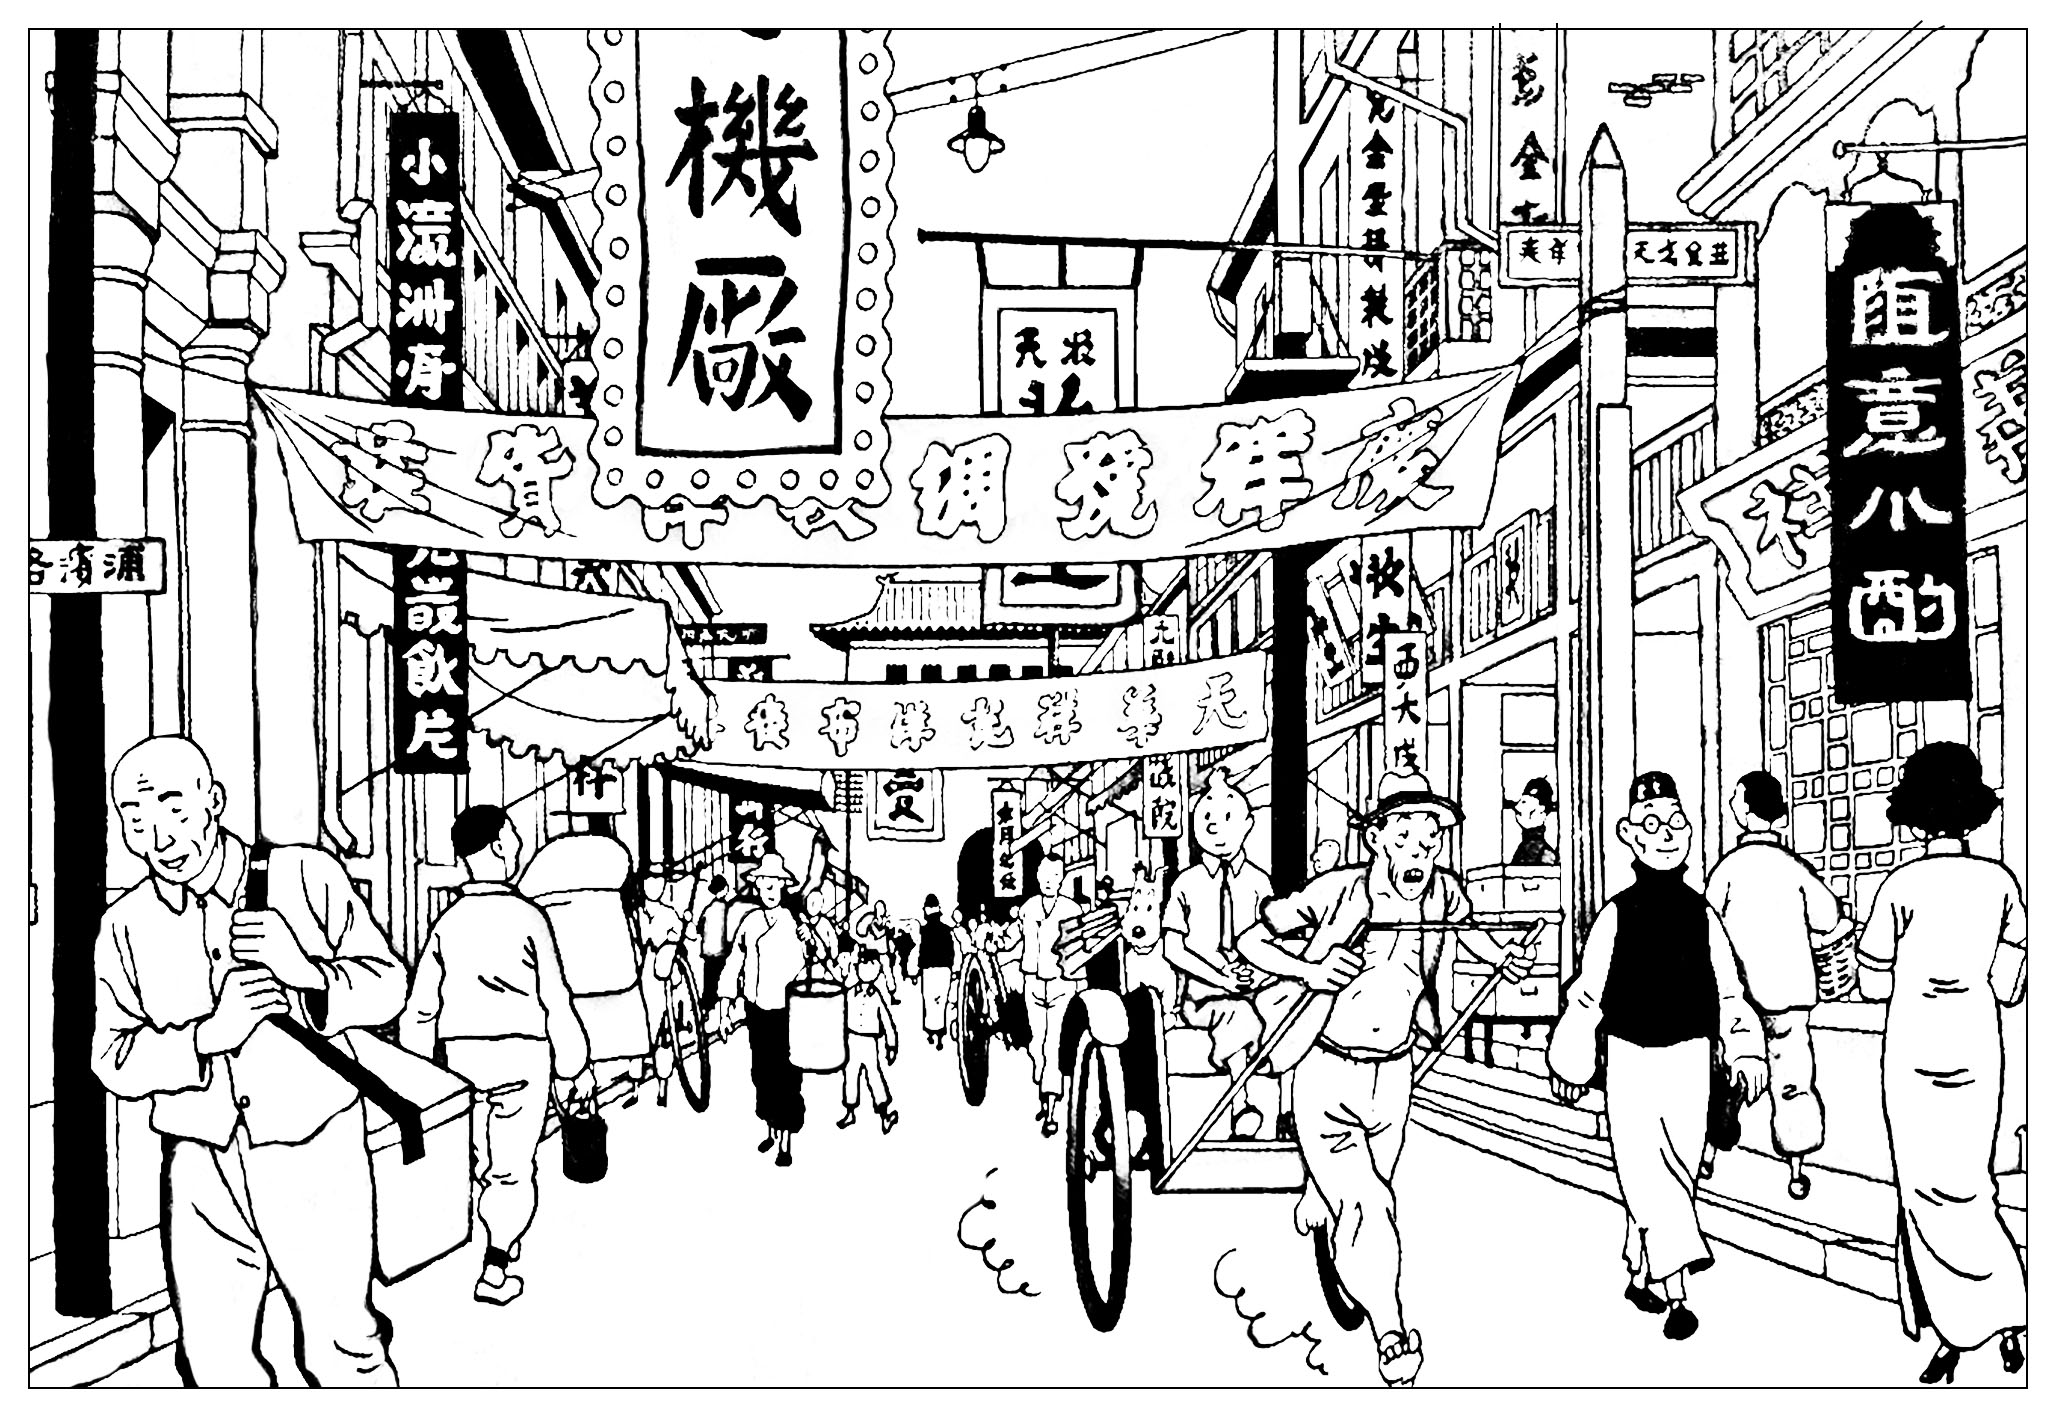 Coloring page created from 'The Blue Lotus' : the fifth volume of The Adventures of Tintin